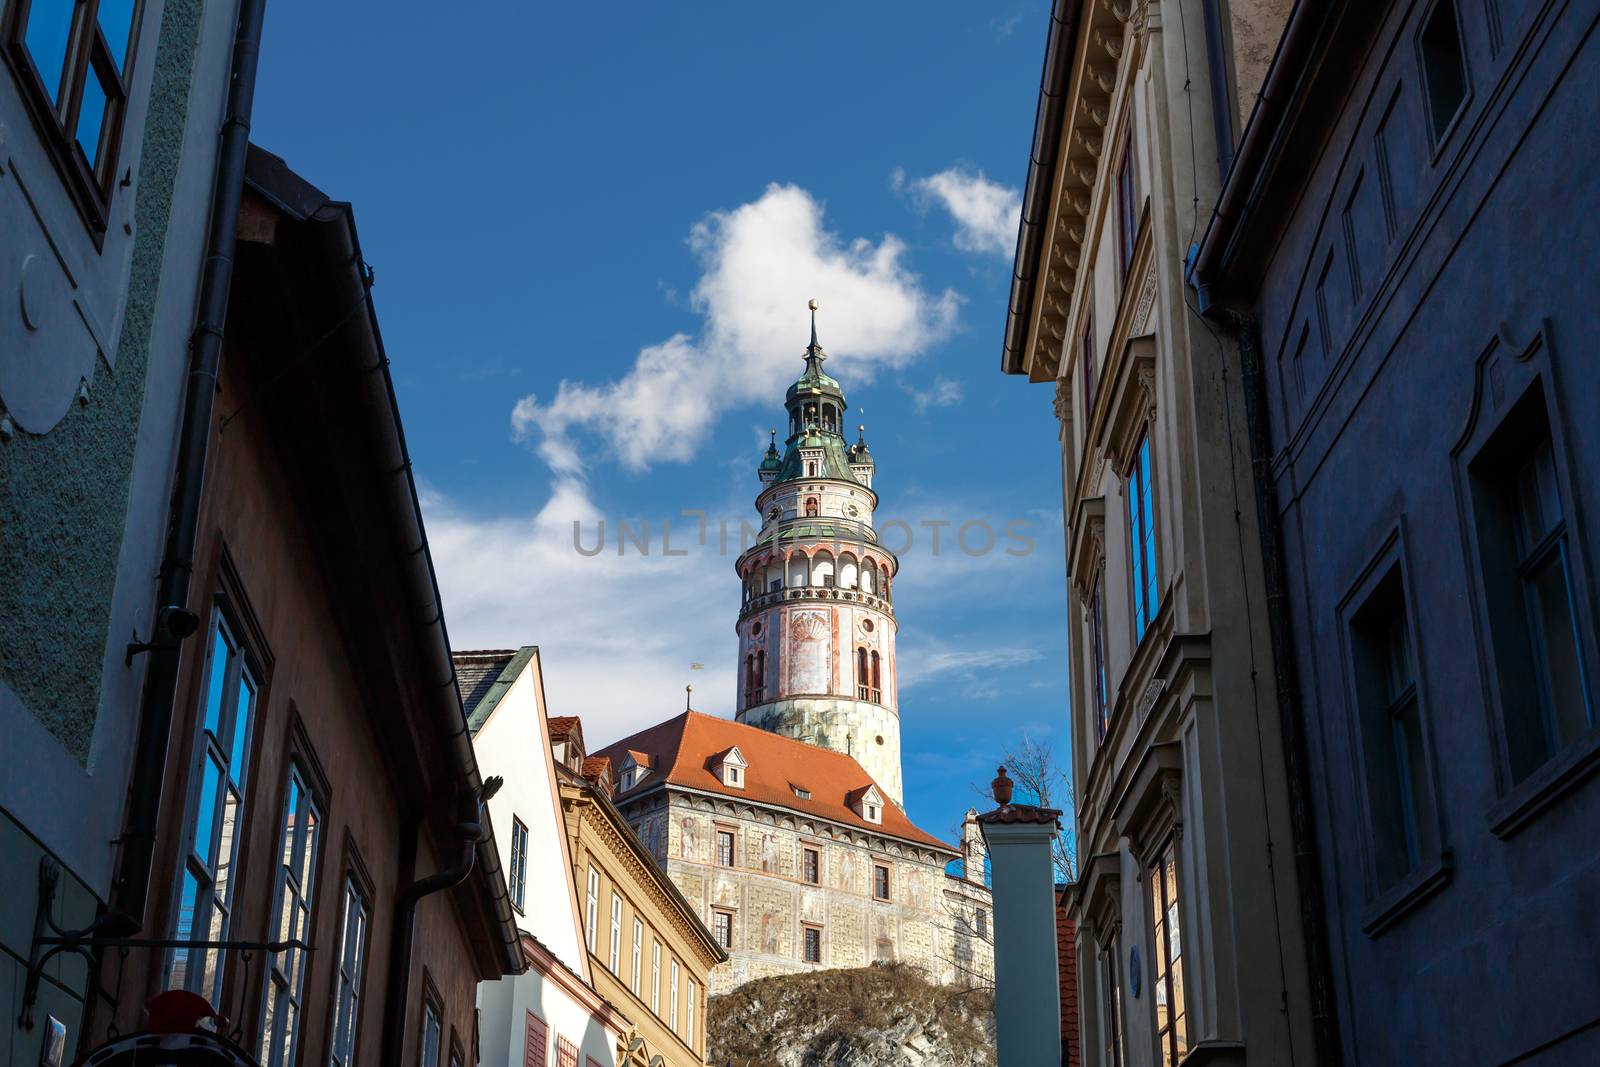 General view of Little Castle Tower in Cesky Krumlov, colorful historical tower on cloudy blue sky background.